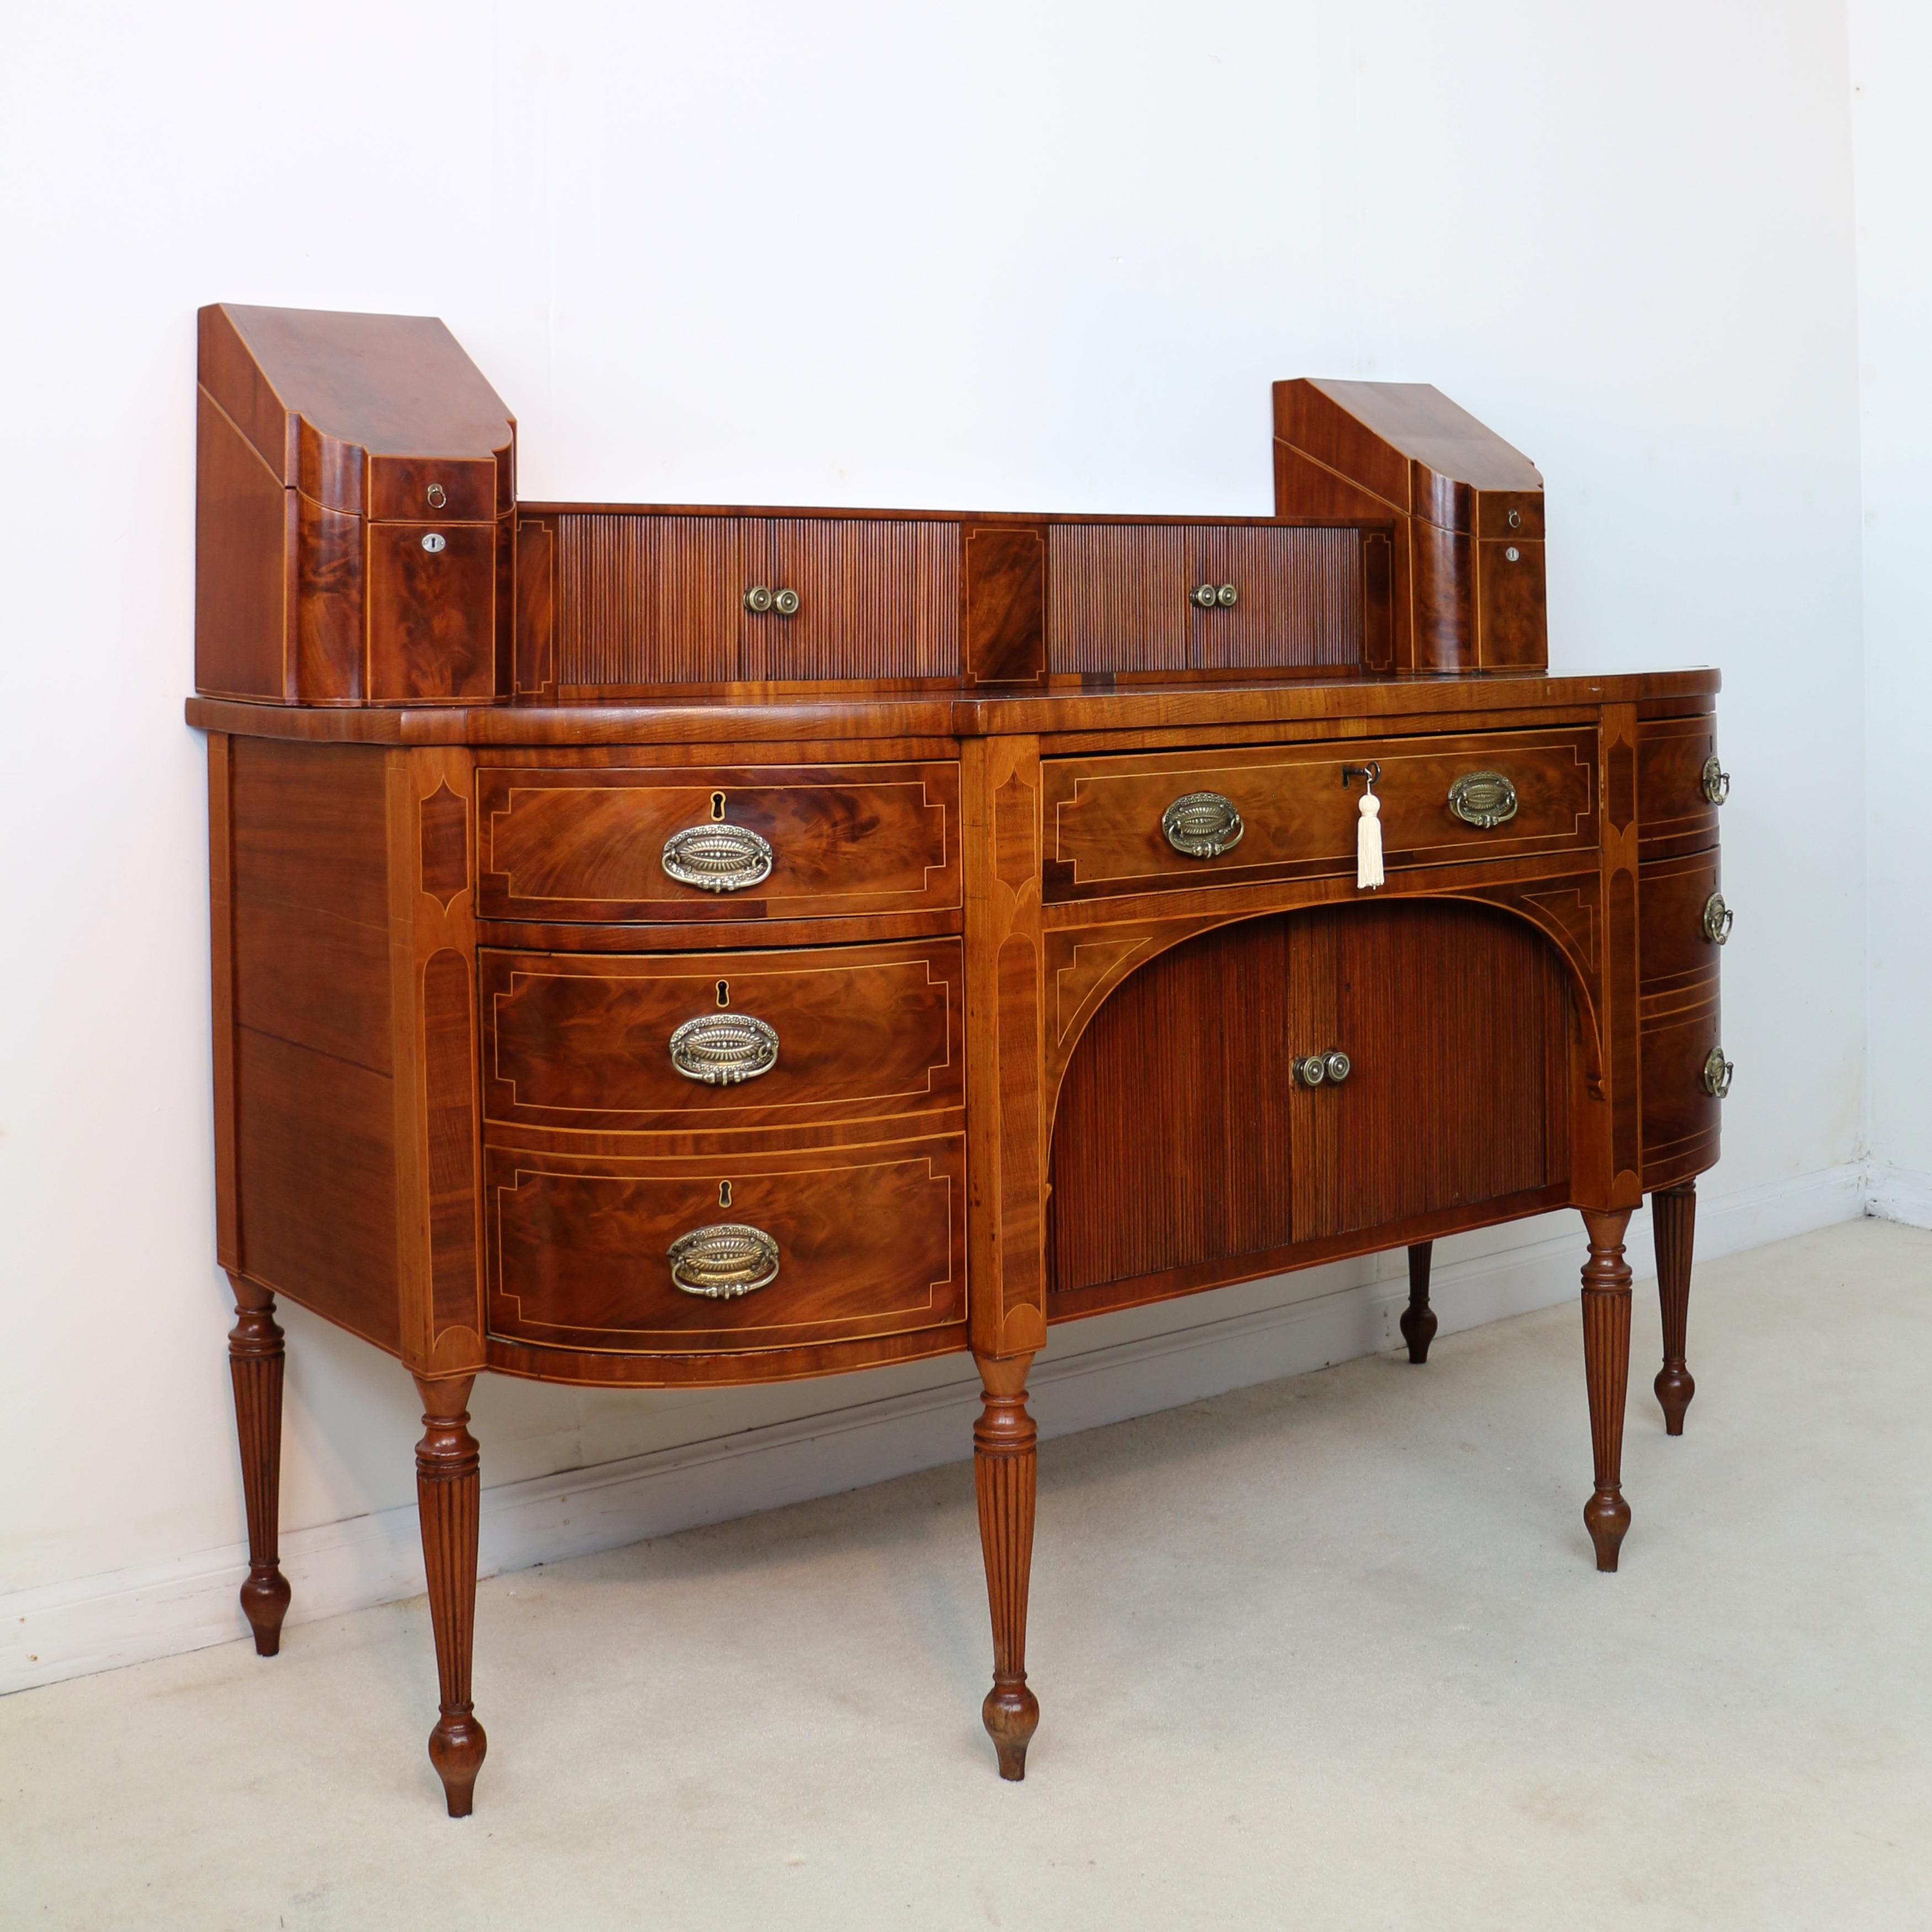 An outstanding George III Scottish flame mahogany stage-back sideboard with original knife boxes and dating to circa 1800, probably Edinburgh. Highlighted with plentiful boxwood stringing to the front and sides, the stage has a central inlaid tablet